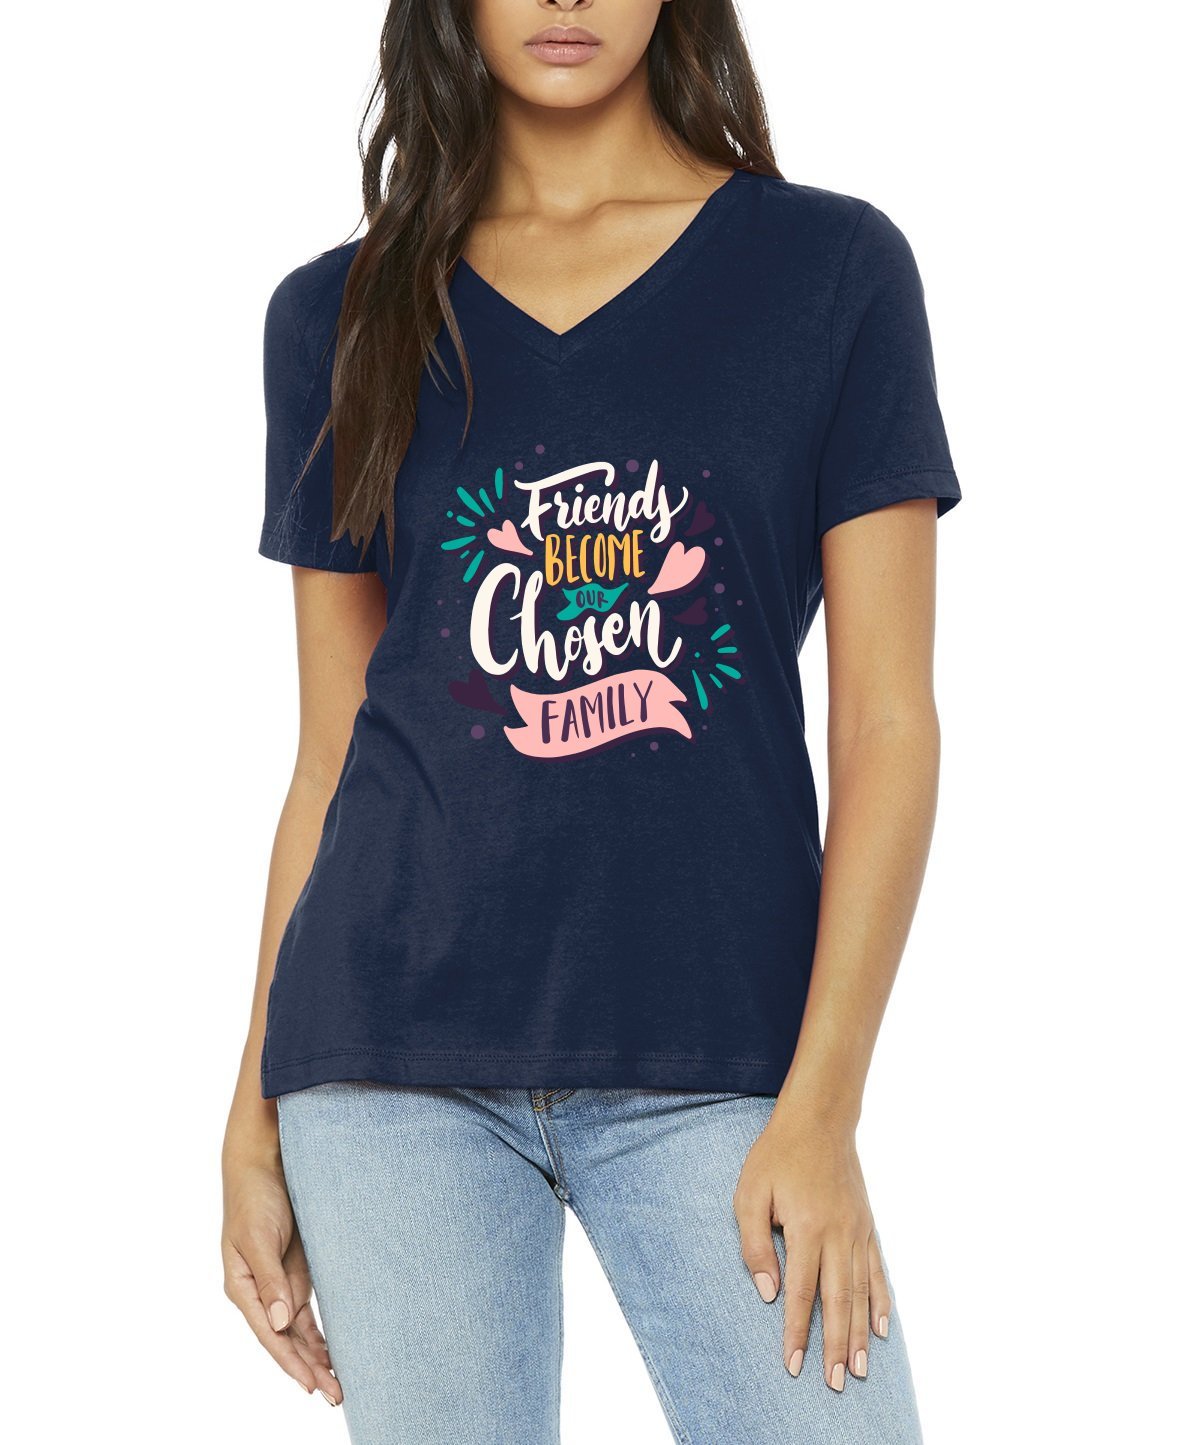 Friends BELLA+CANVAS® Ladies Relaxed Jersey V-Neck Tee